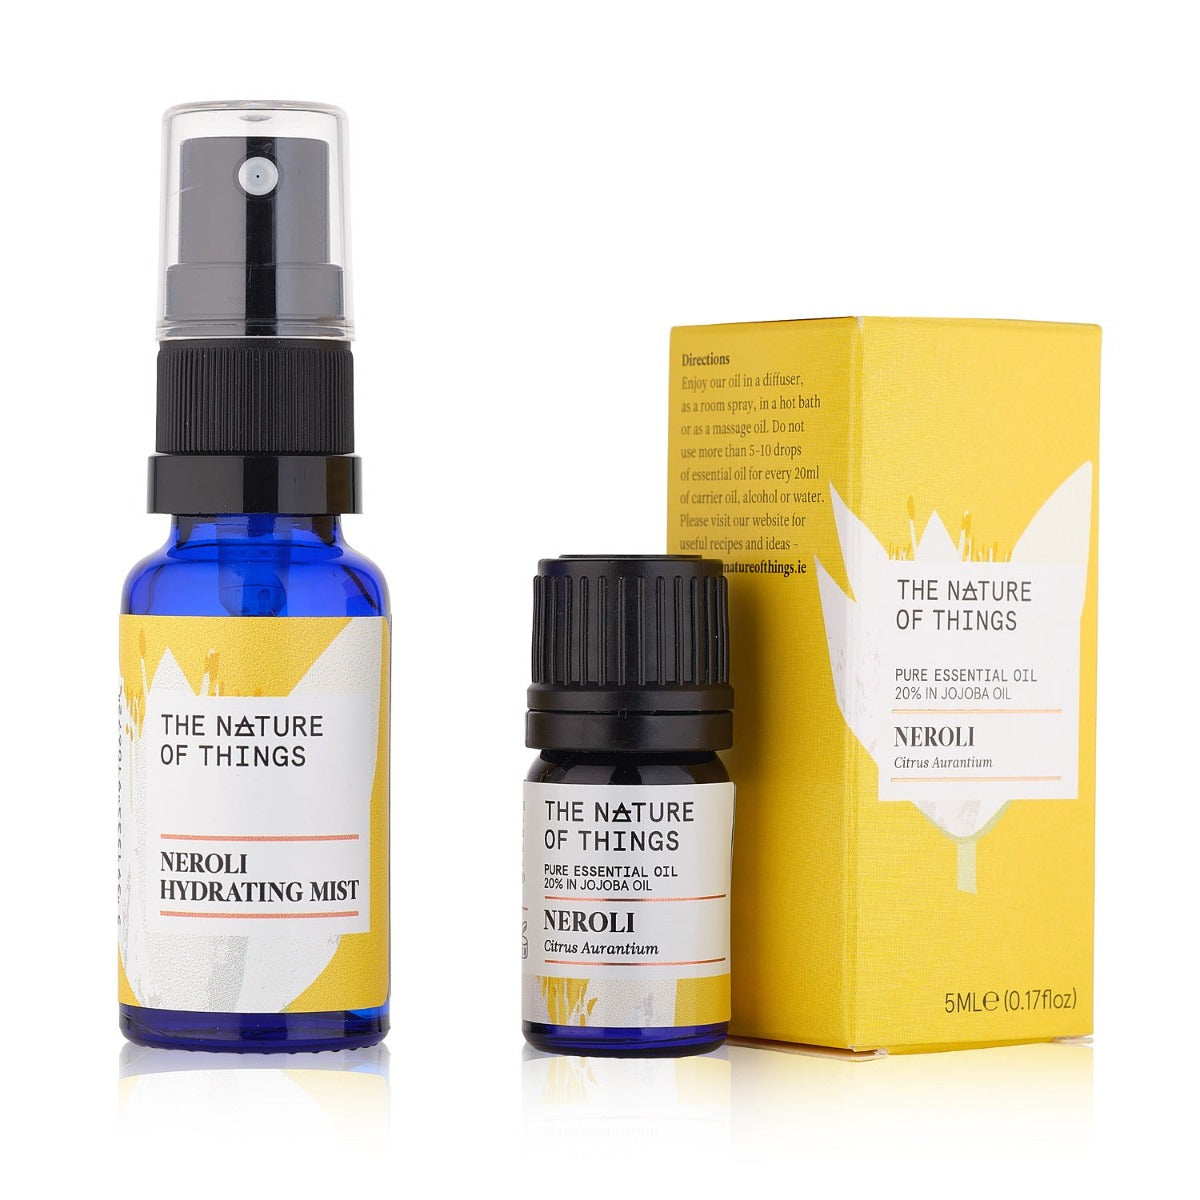 Gift Set - Neroli Hydrating Mist from The Nature of Things